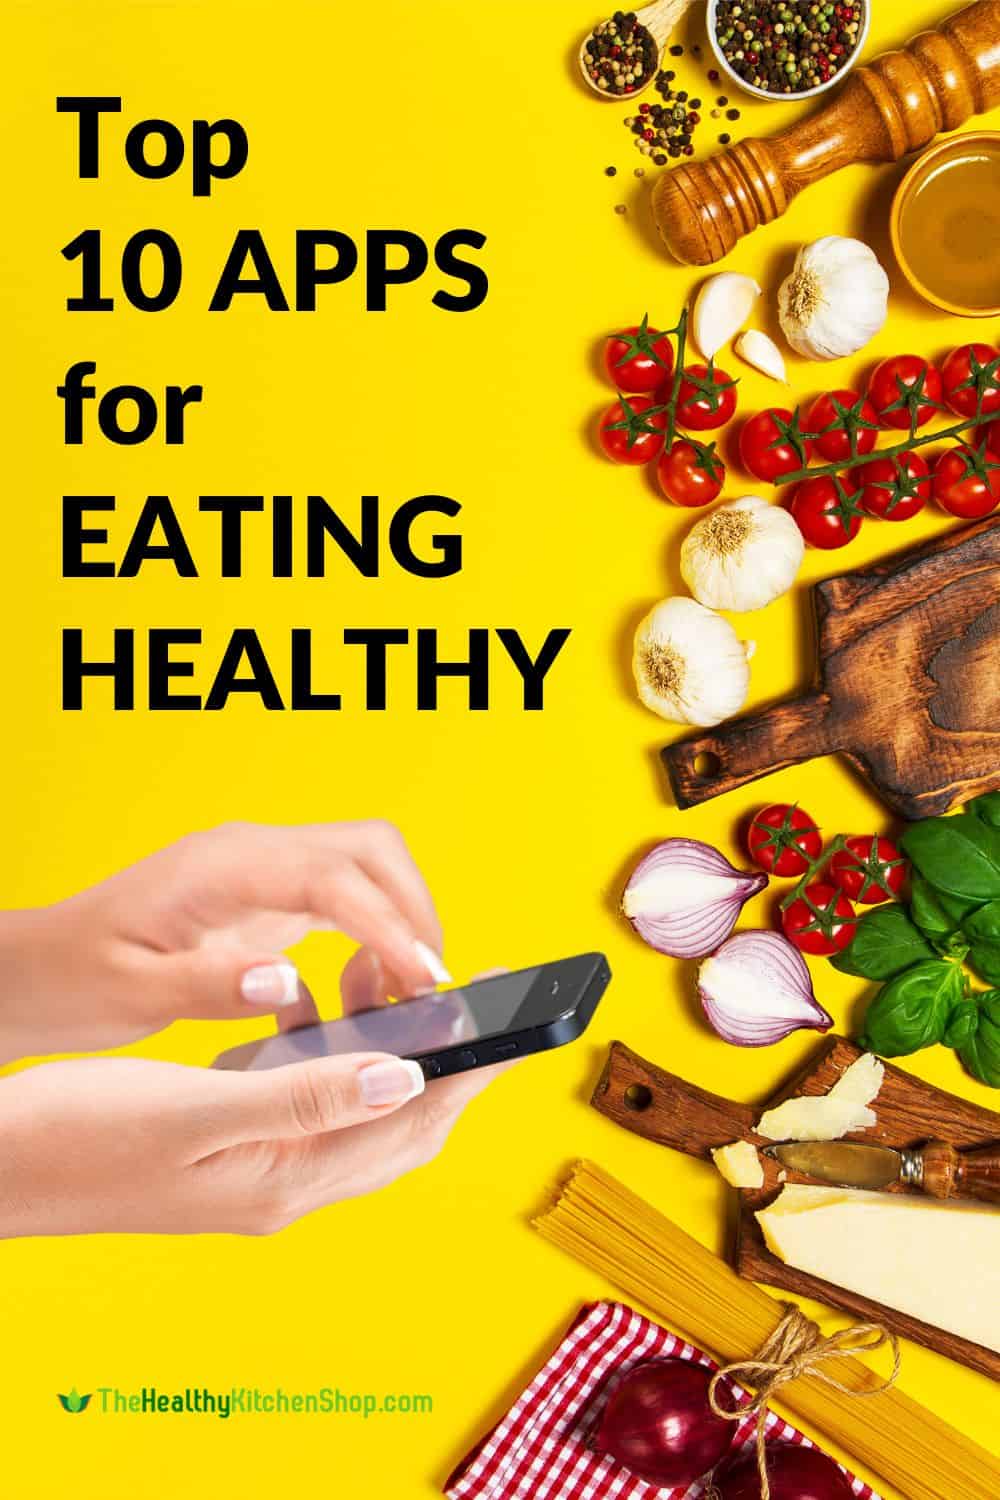 Top 10 Apps for Eating Healthy